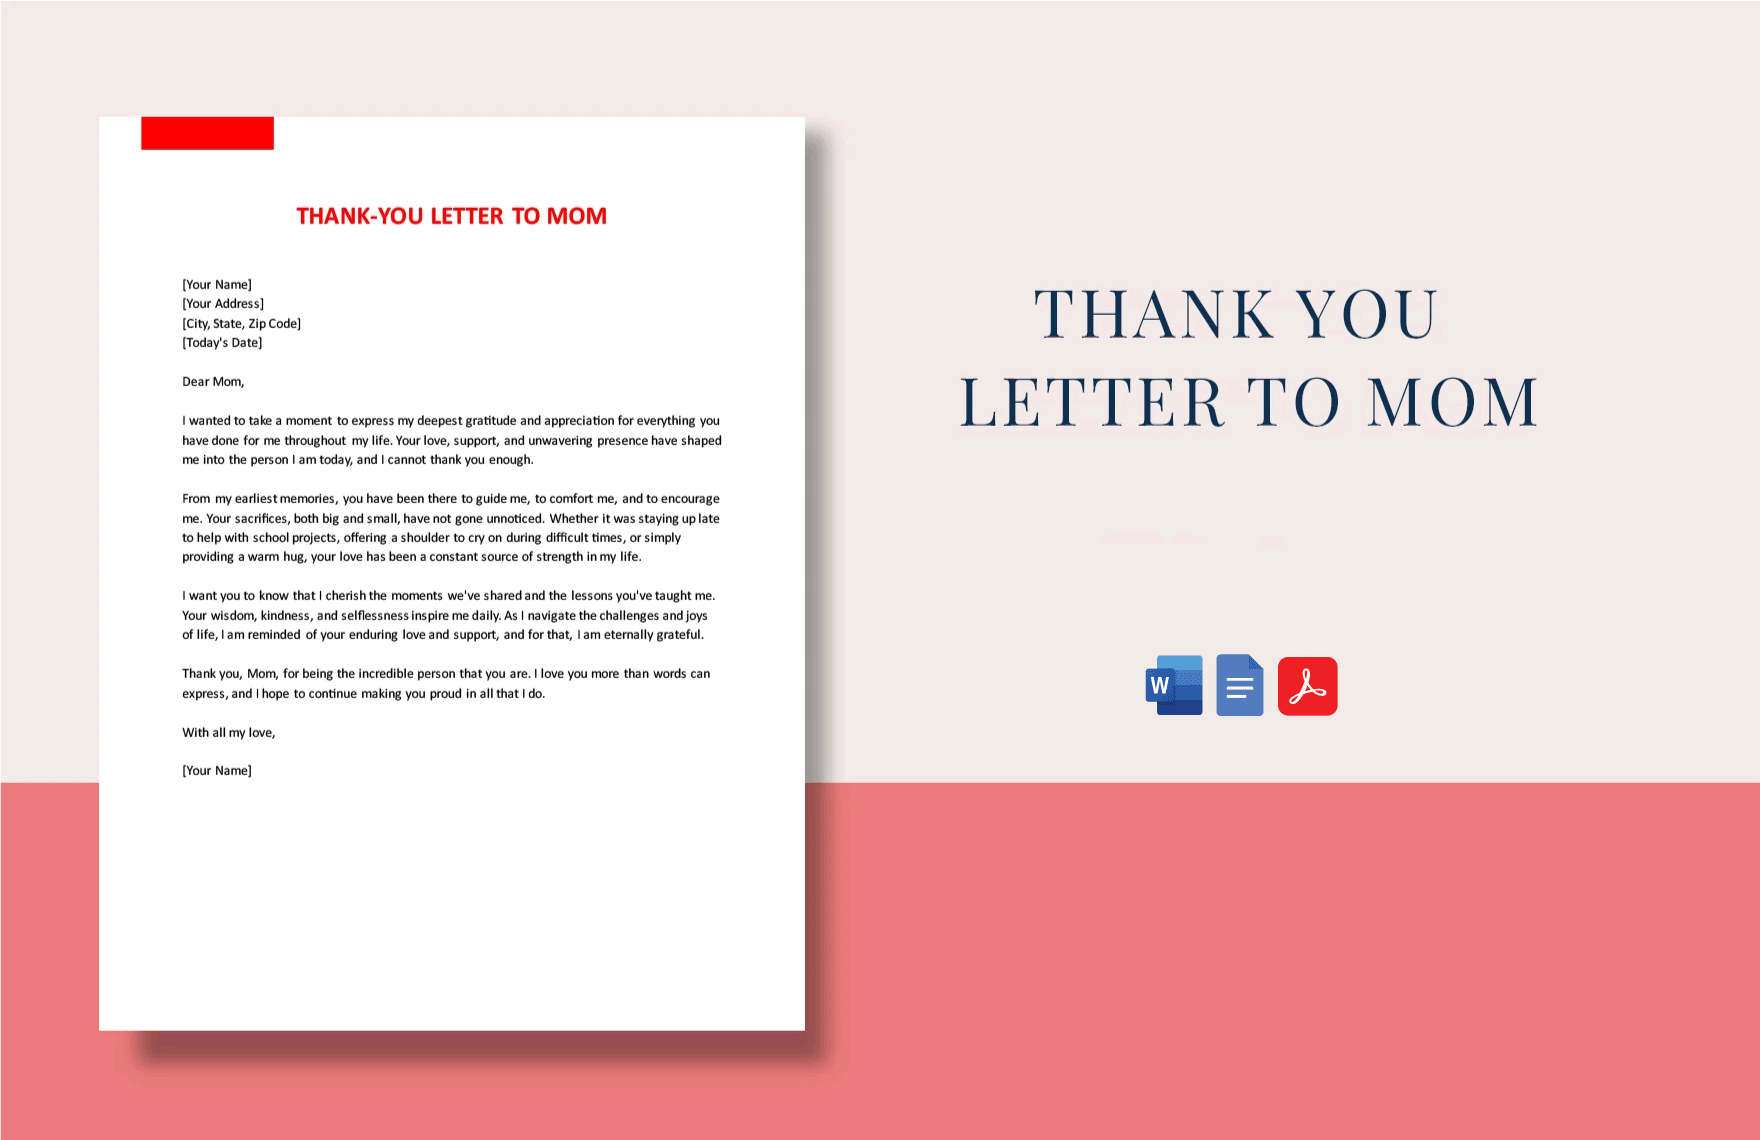 Thank-You Letter to Mom in Word, Google Docs, PDF